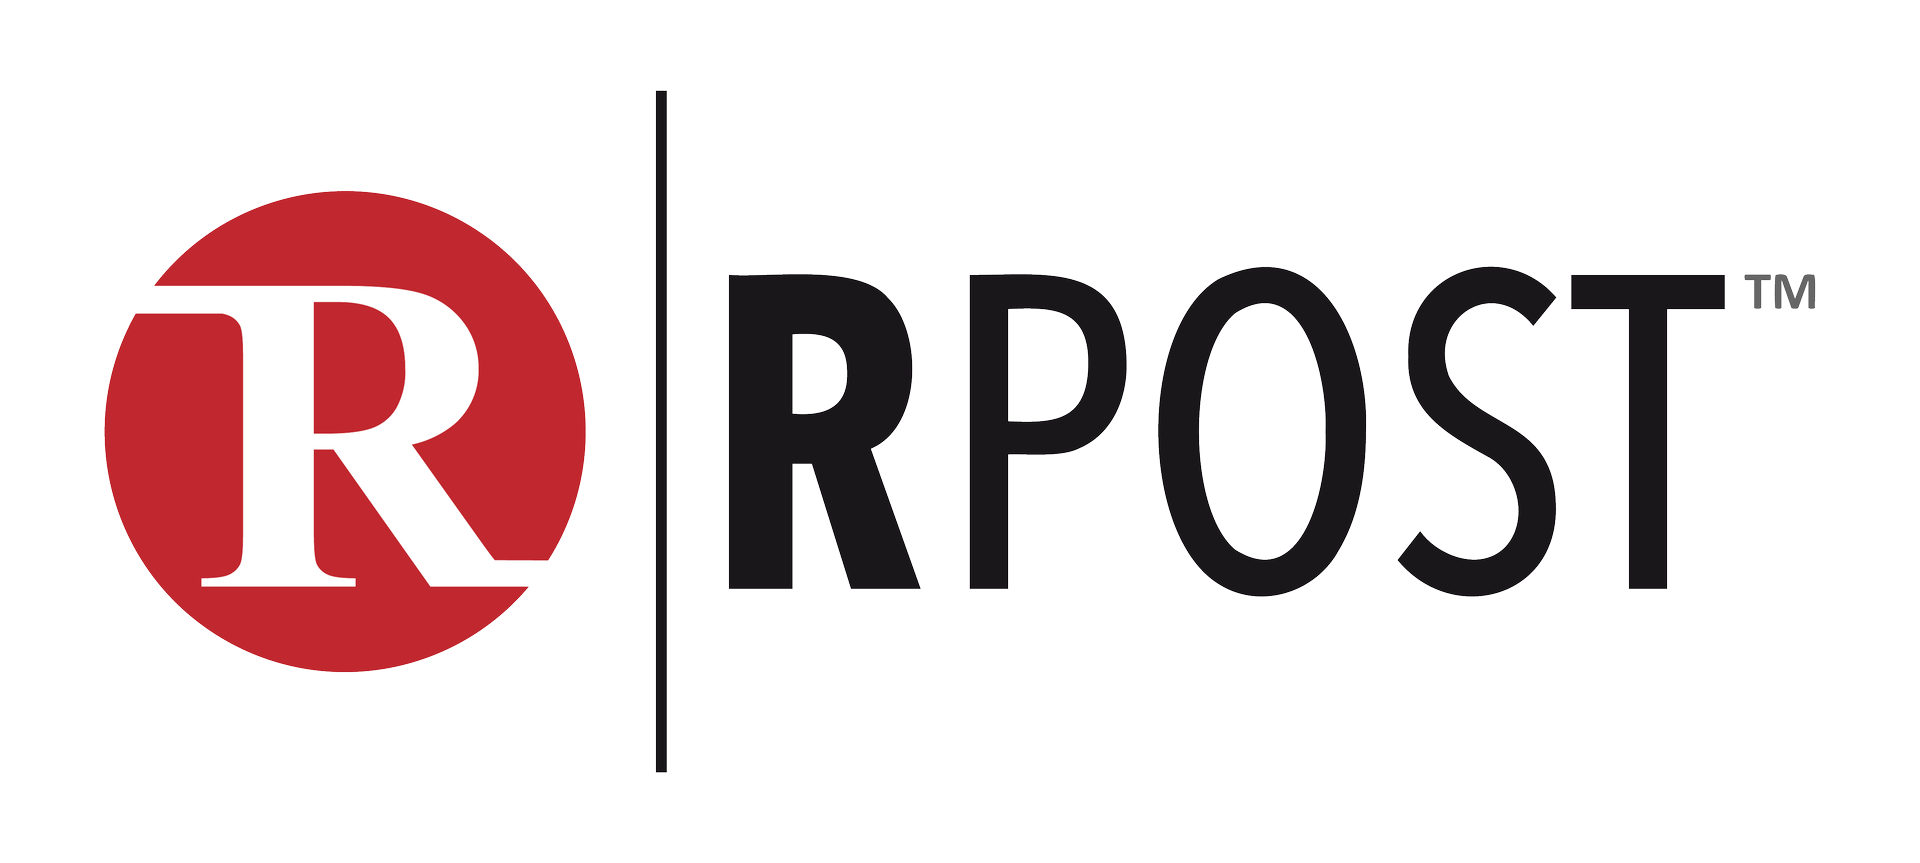 RPost Announces OPTIMIZE!2022, Its User Conference that Centers on the “Pandemic” of Cyber Threats; Coincides with Cybersecurity Awareness Month